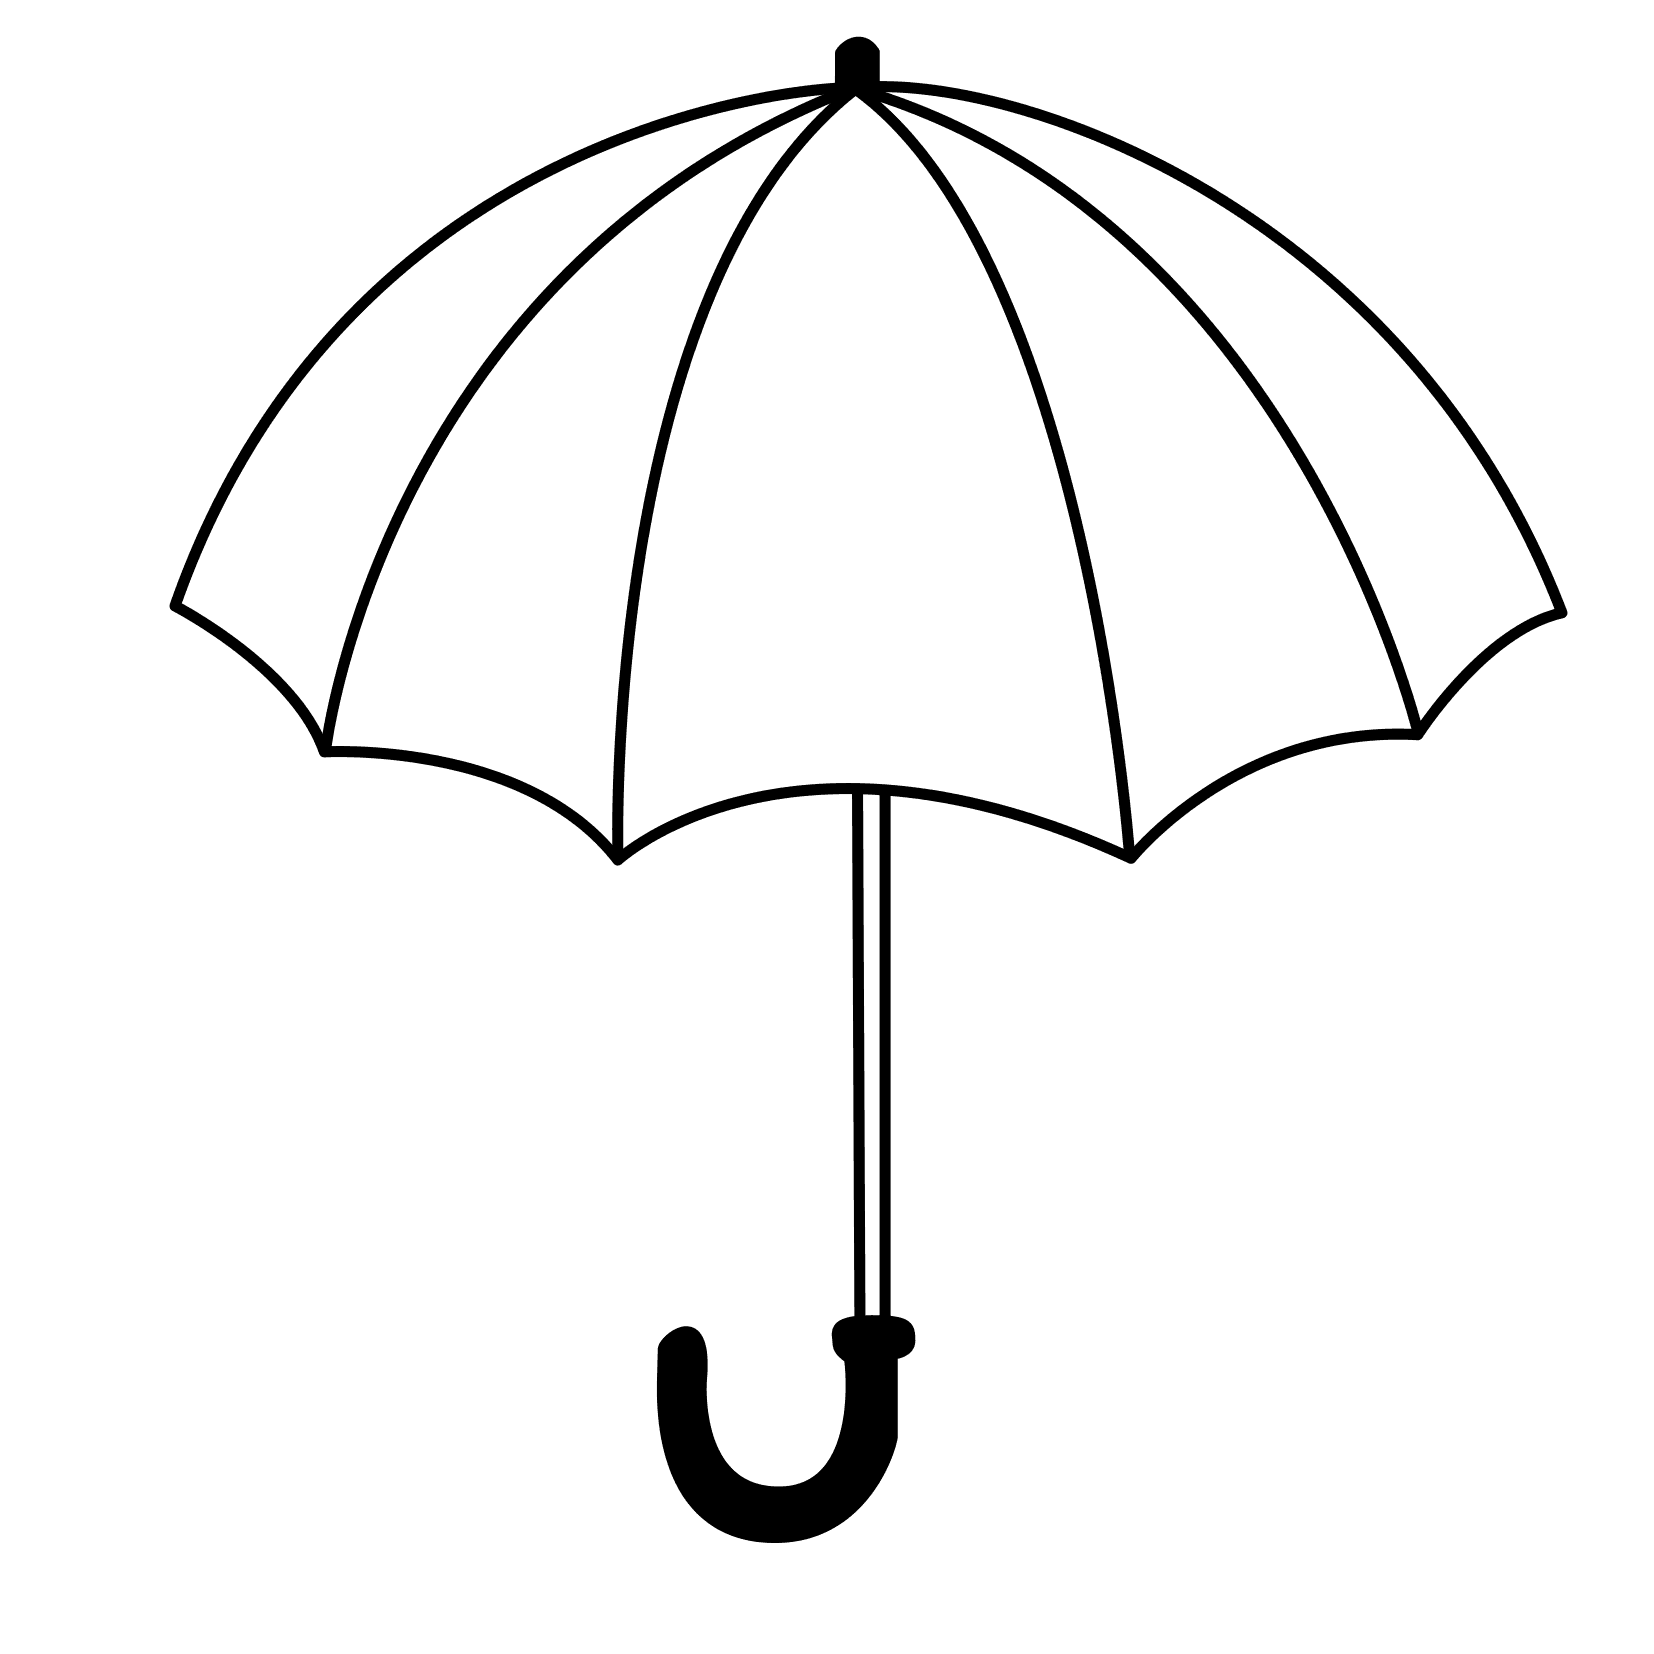 Umbrella Coloring Pages for Kids Blank Umbrella Printable 20 20 Throughout Blank Umbrella Template